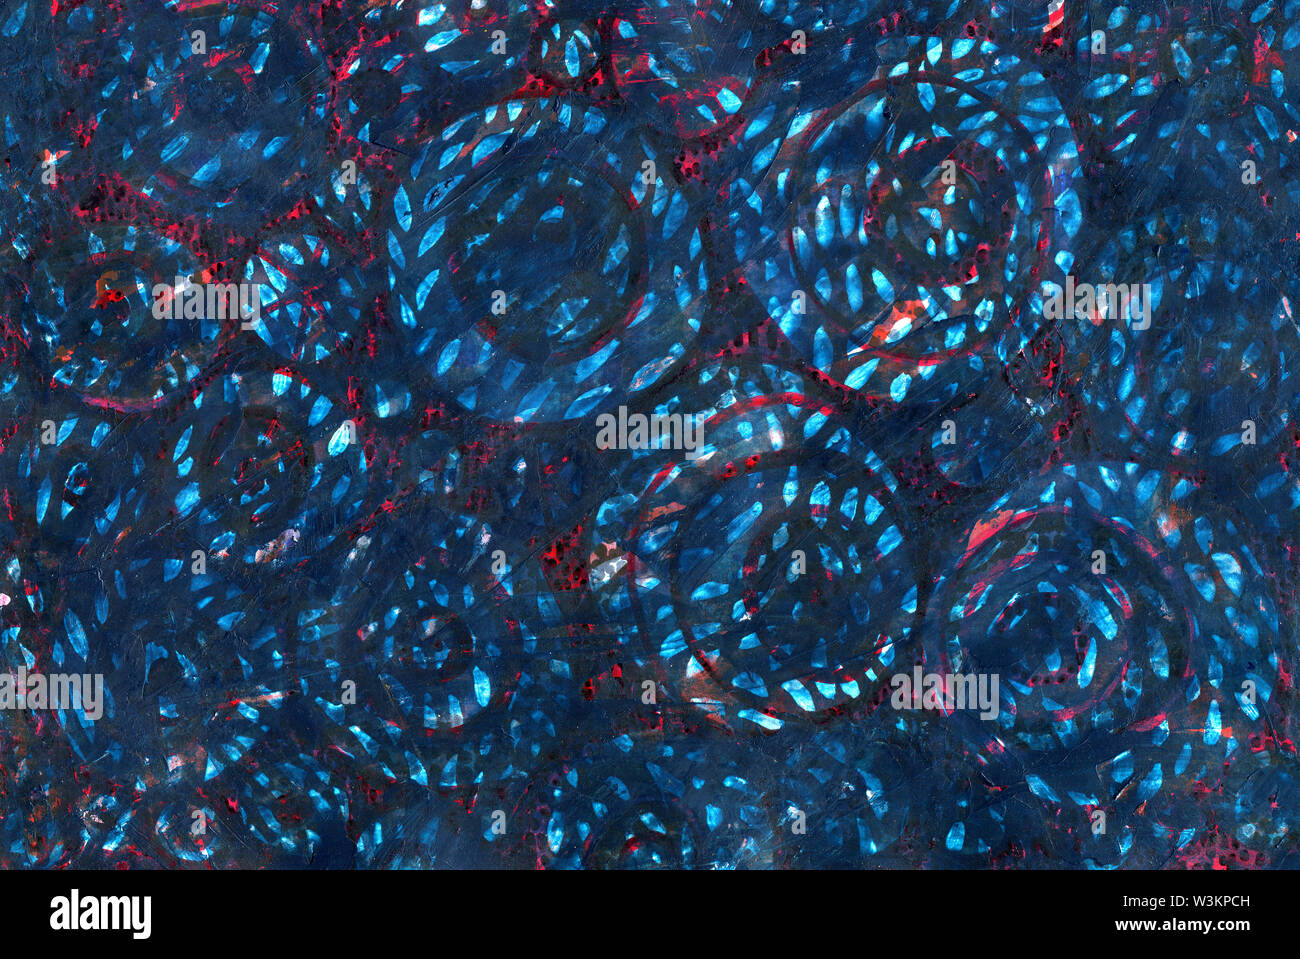 Abstract blue and red background. Grunge texture with scratches, dots and lines, with circles and white spots. Brush imprint, flower buds, body cell. Stock Photo